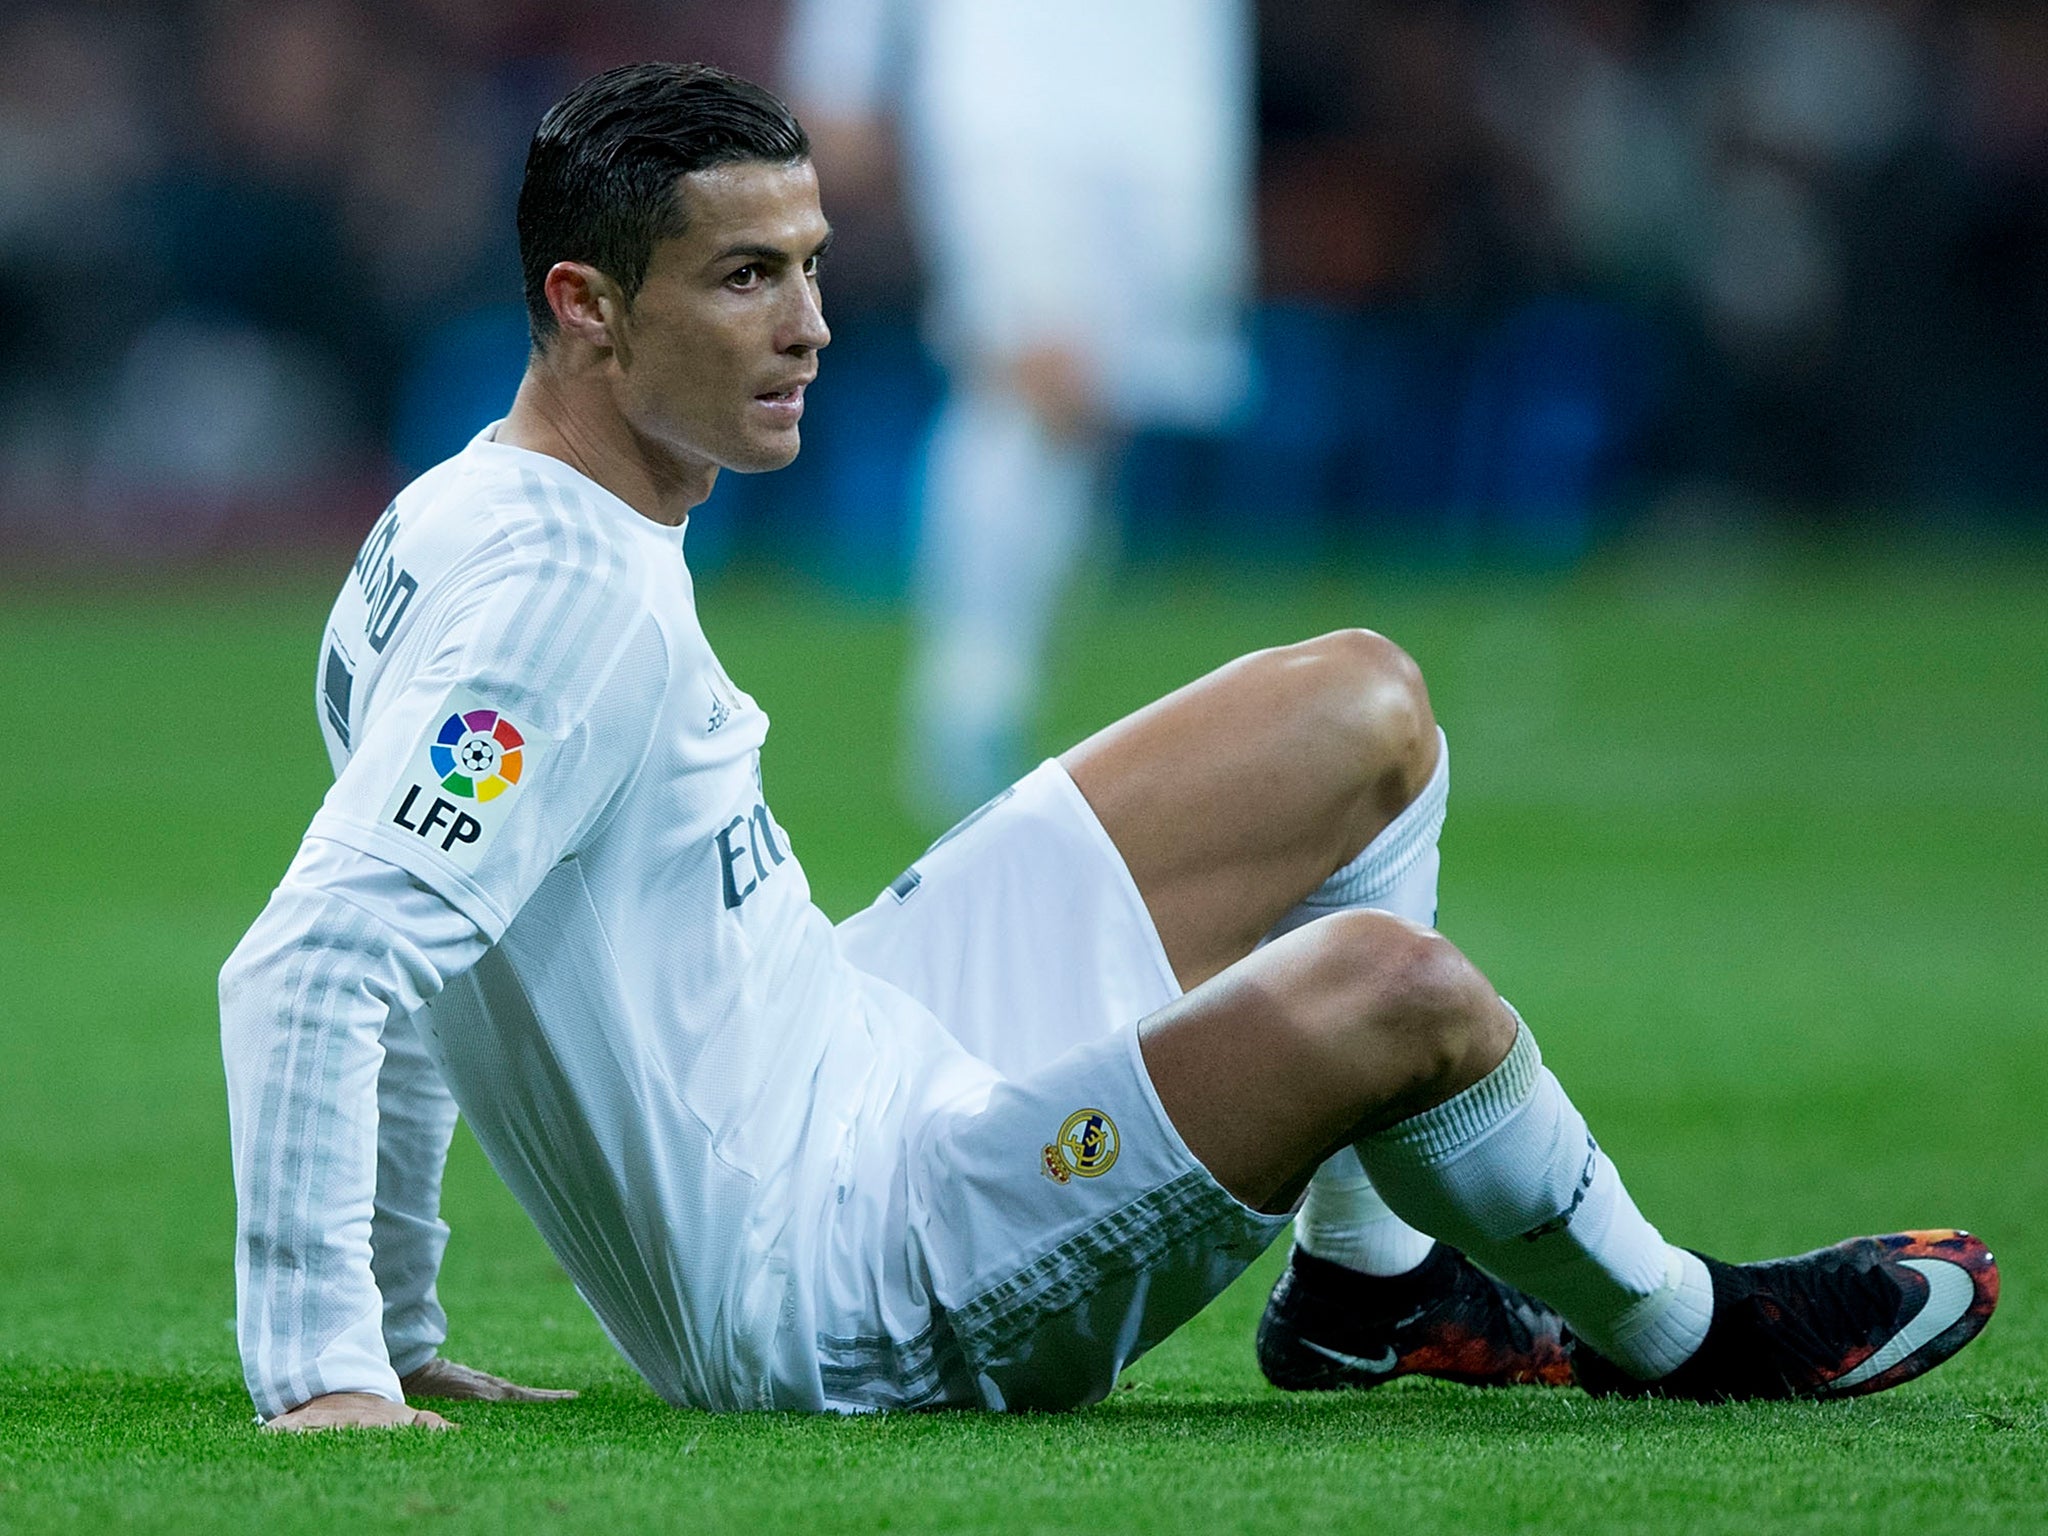 Cristiano Ronaldo reacts during Barcelona's 4-0 win over Real Madrid